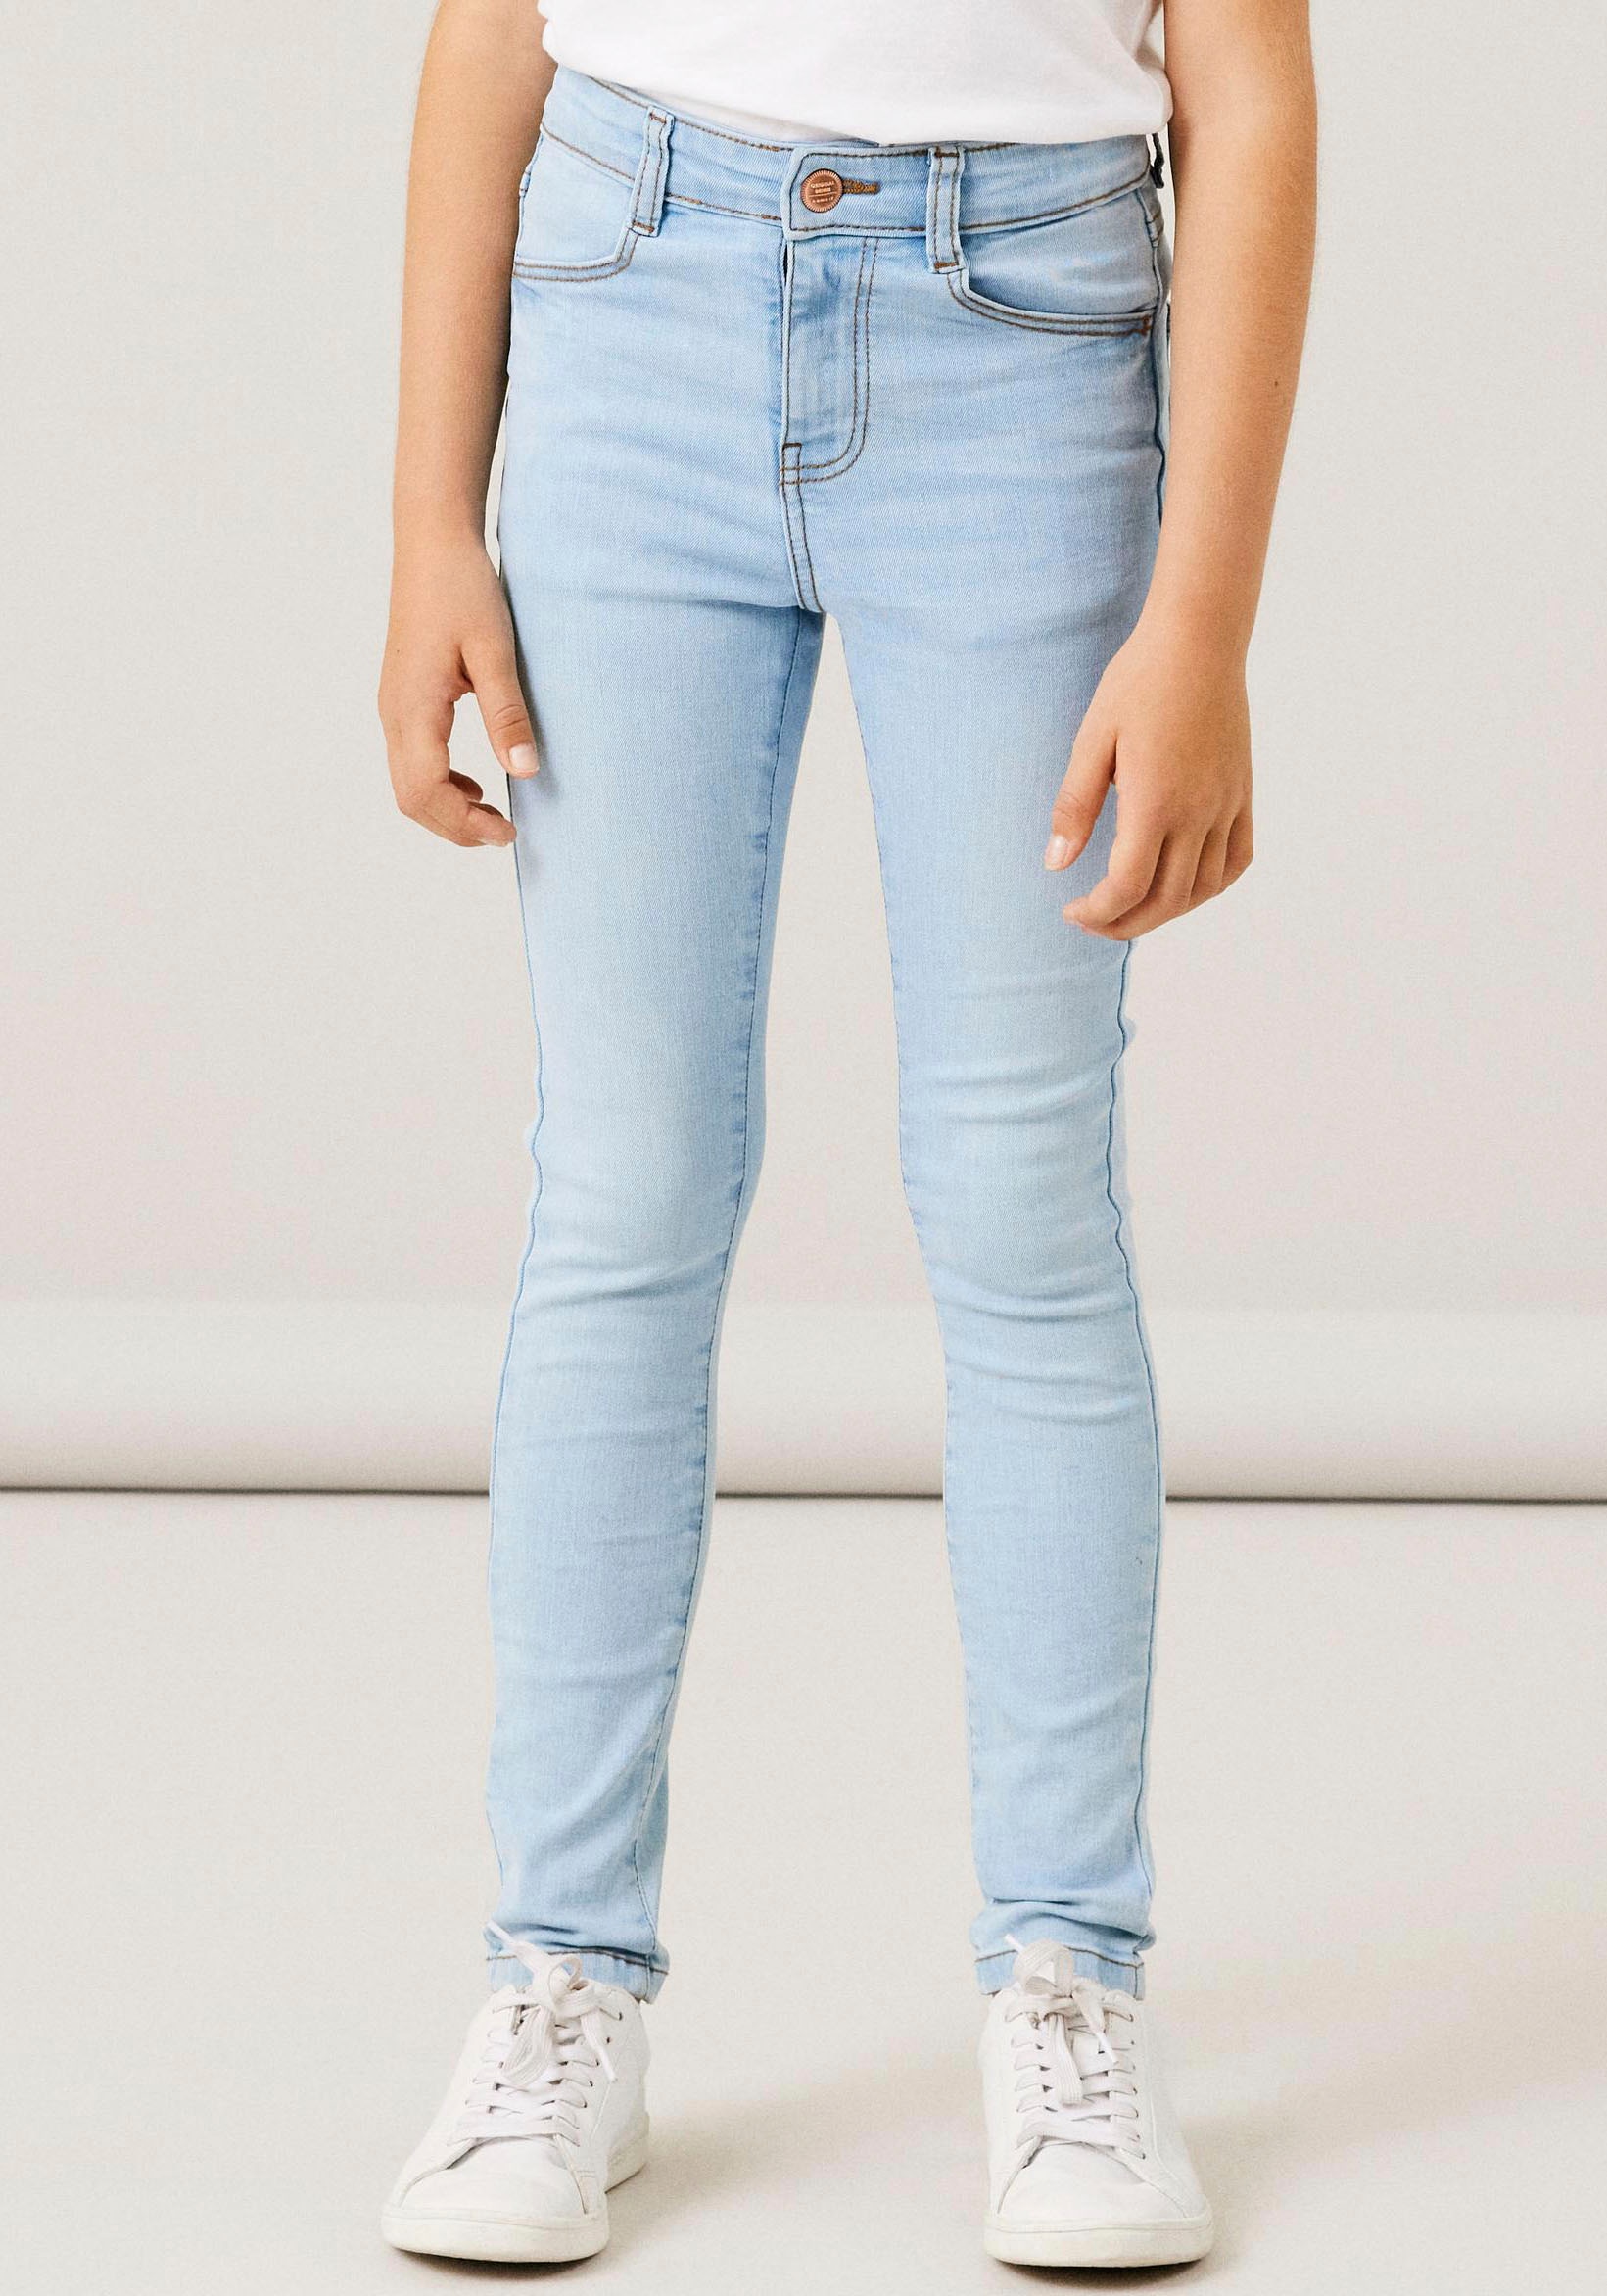 »NKFPOLLY Name JEANS kaufen OTTO SKINNY 1180-ST Stretch bei mit NOOS«, Skinny-fit-Jeans HW It